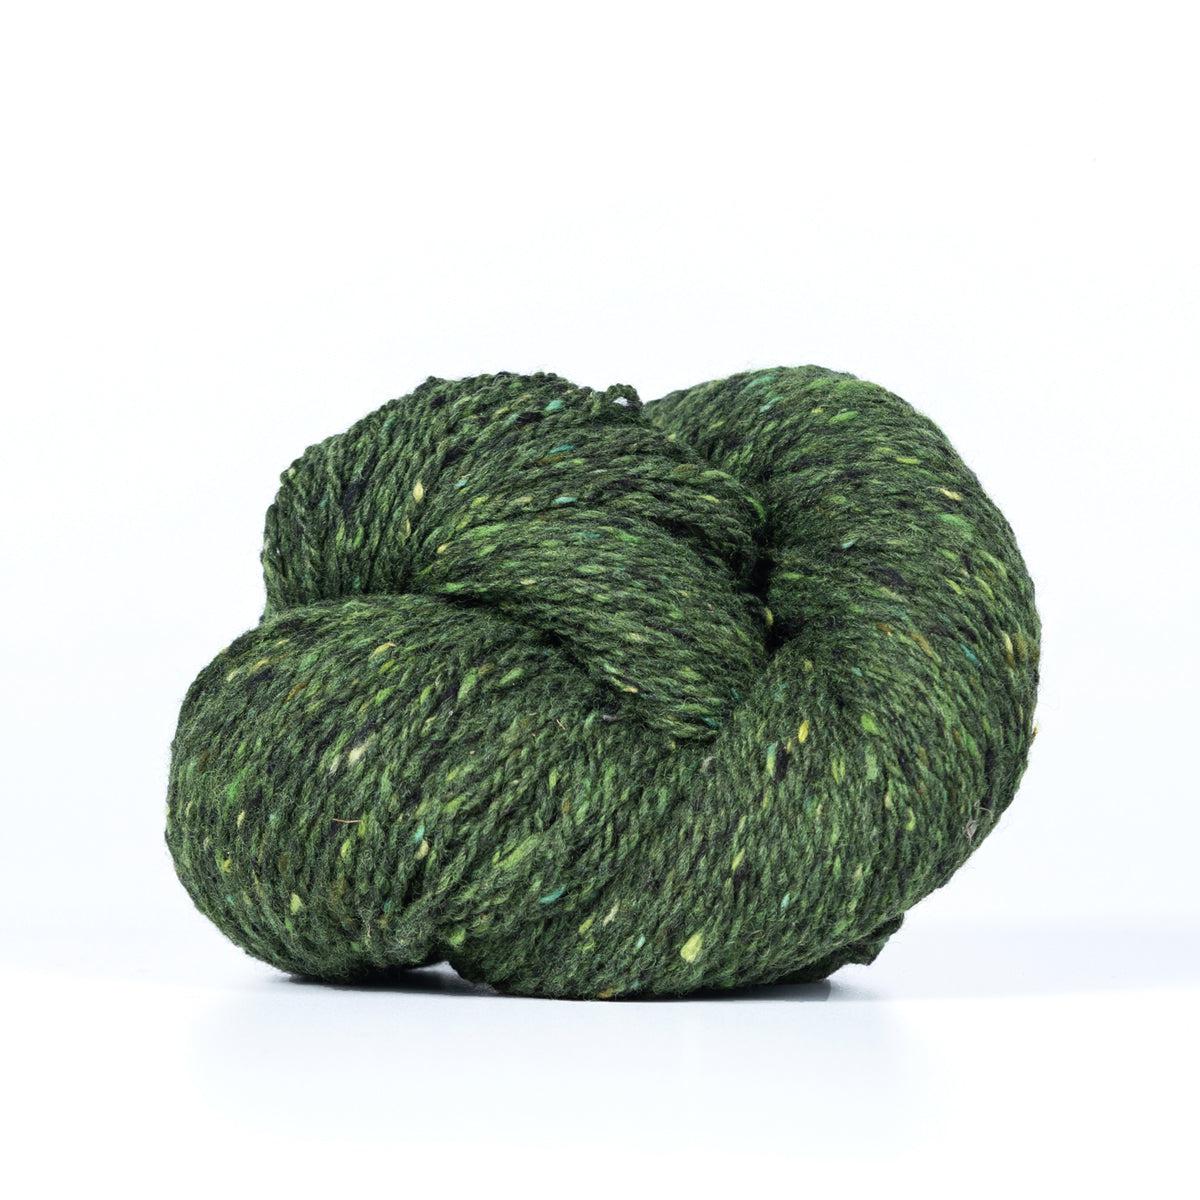 A skein of Kelbourne Woolens Lucky Tweed Pine, a dark green with lighter green and yellow flecks.